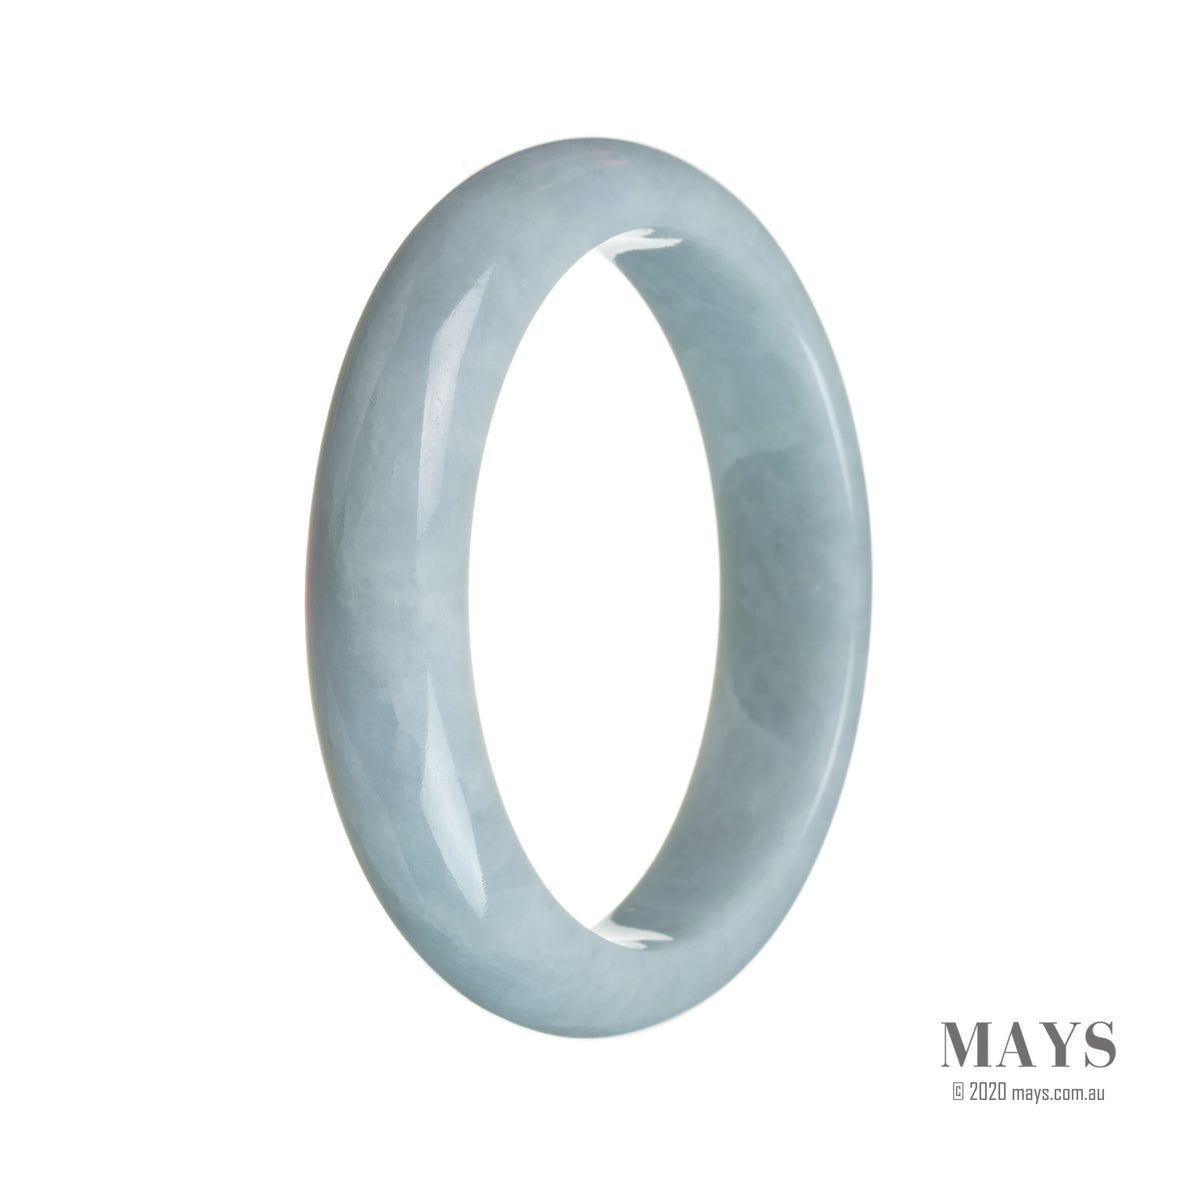 A close-up photo of an authentic untreated bluish lavender jadeite jade bangle, in the shape of a half moon, measuring 59mm in diameter.